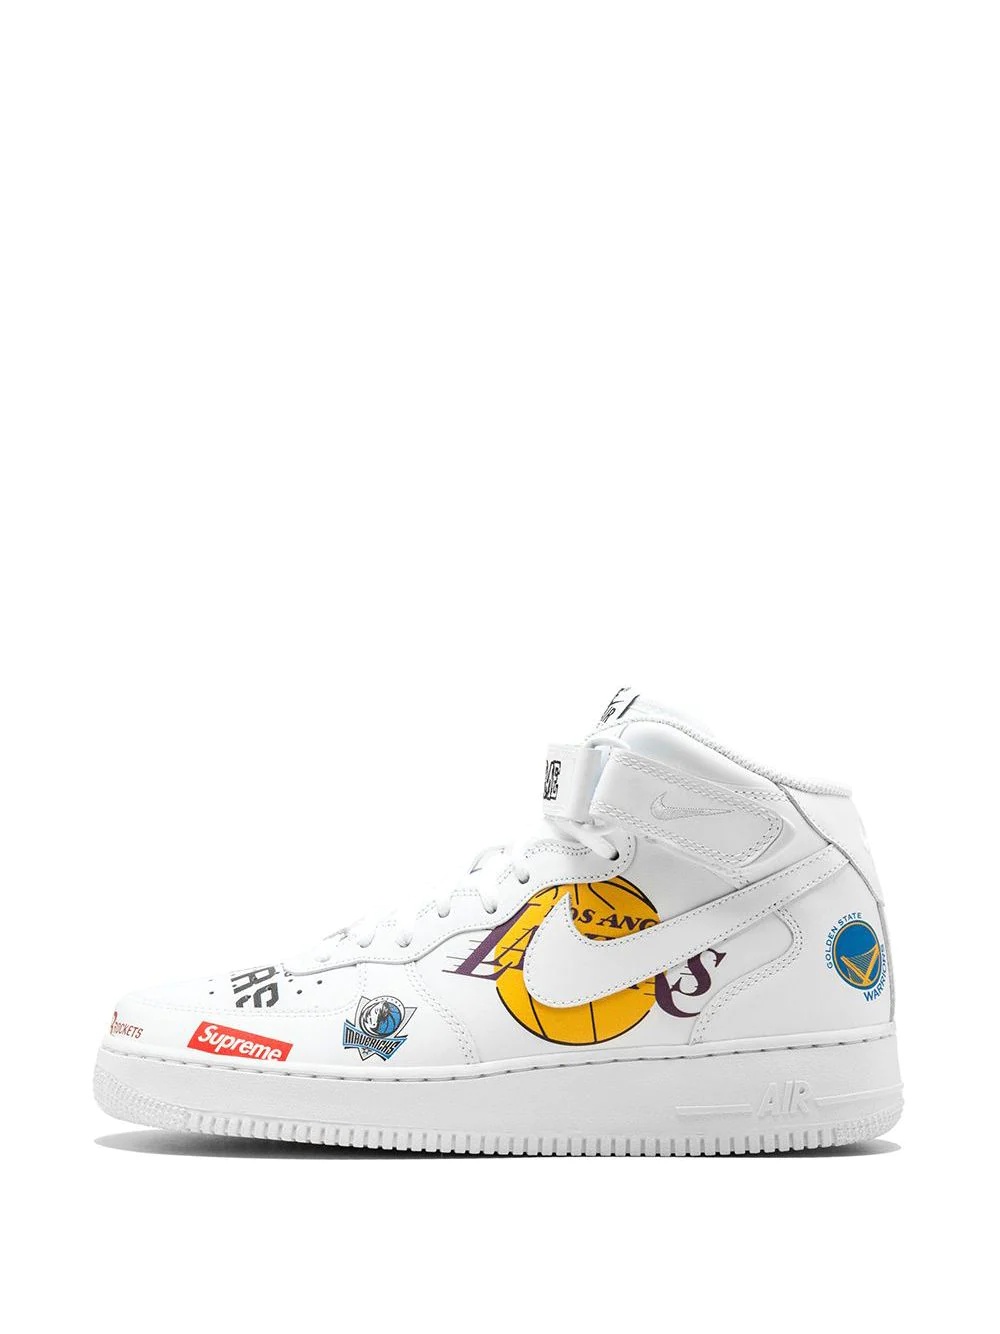 x Supreme x NBA x Air Force 1 MID 07 sneakers - 5